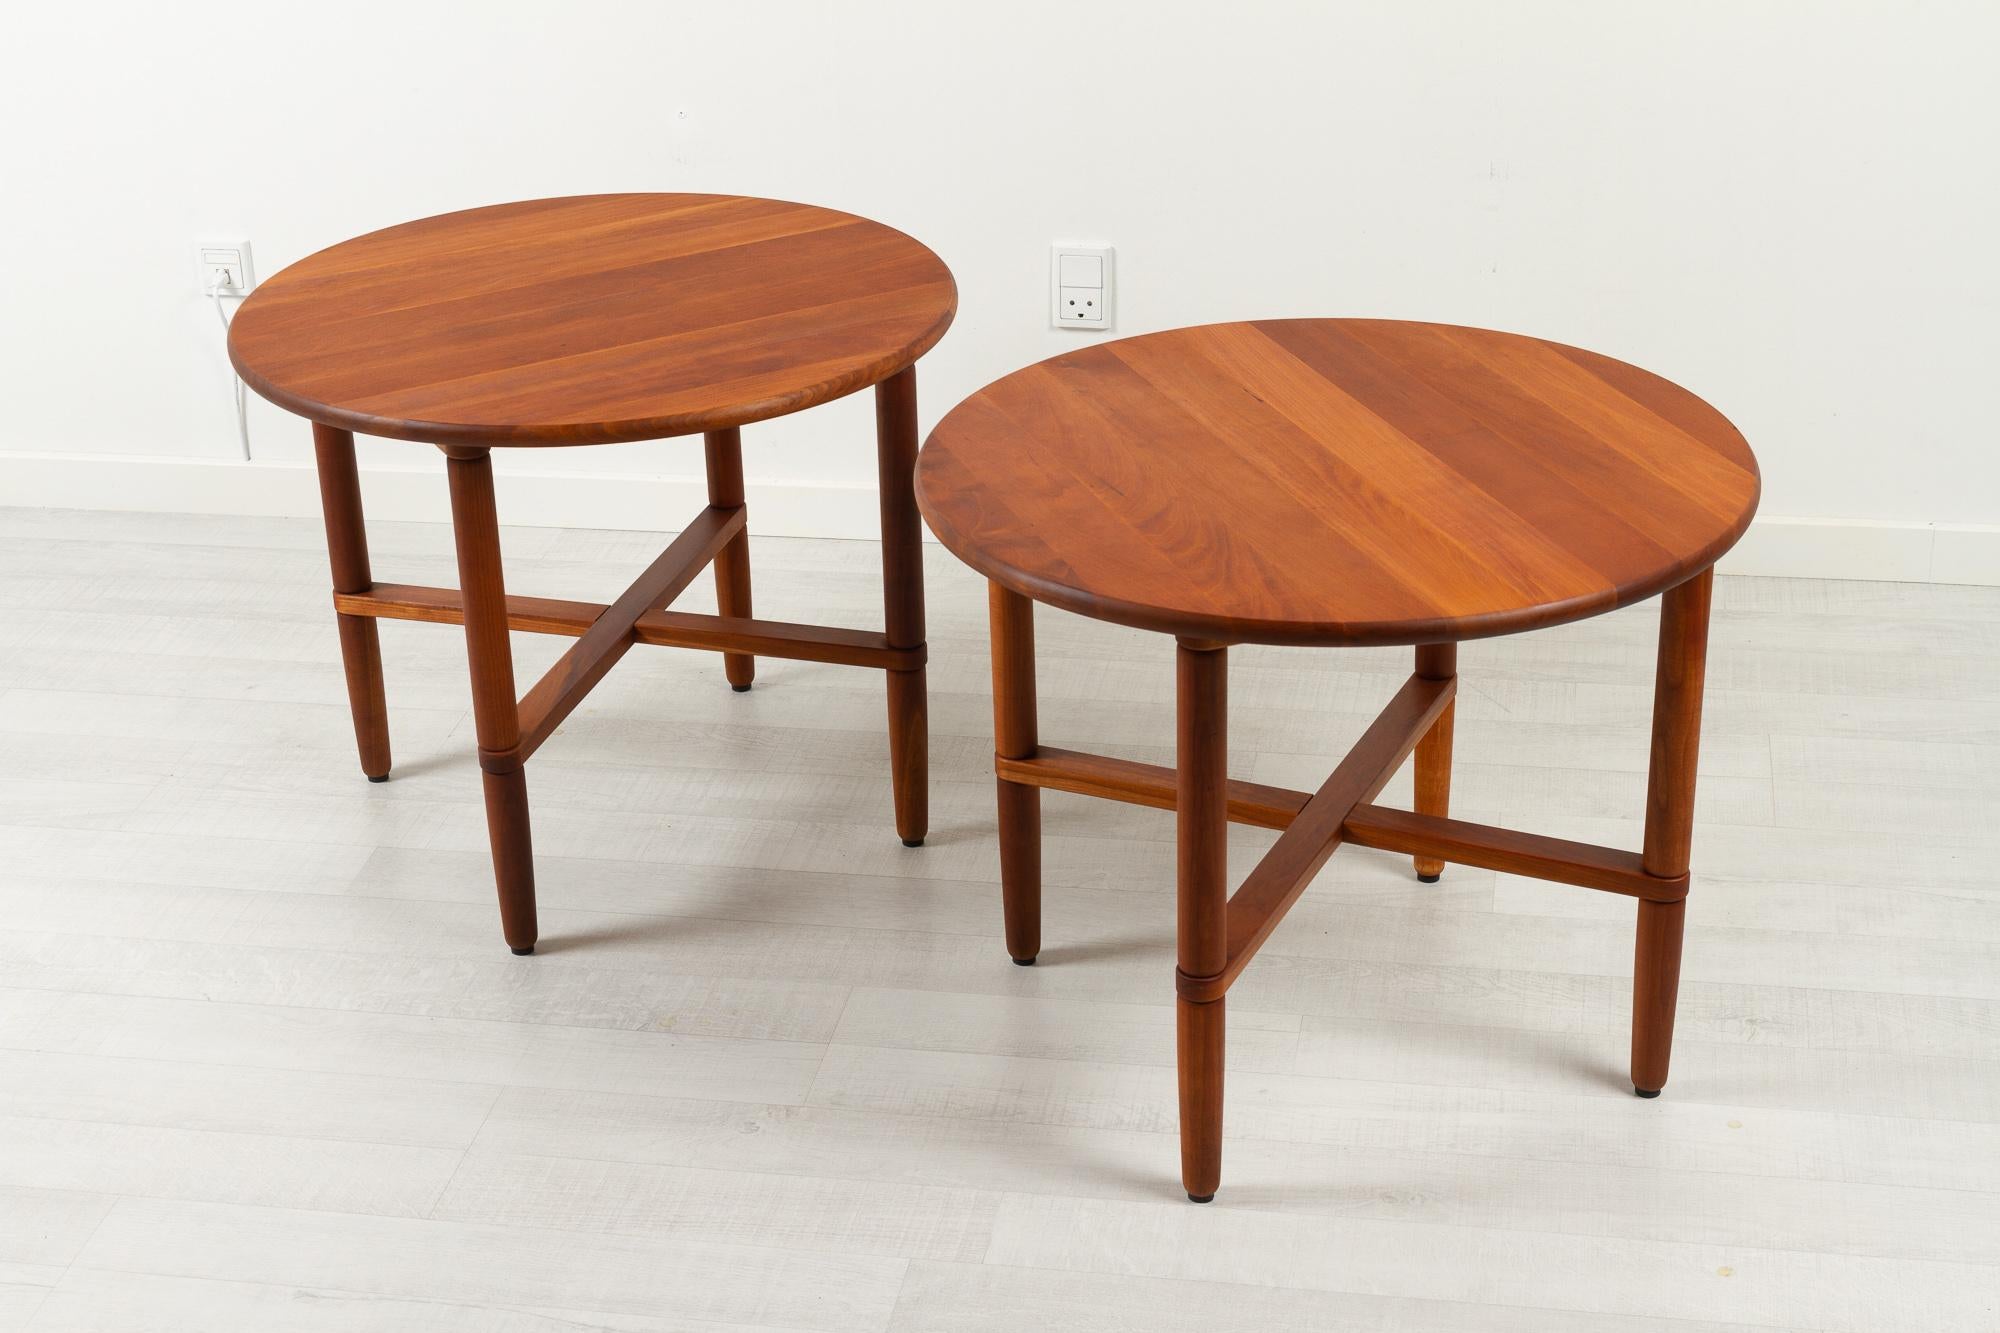 Vintage Danish Cherry side tables by Haslev Møbelsnedkeri, 1990s. Set of 2. 
Pair of vintage Danish round coffee tables designed by Nissen & Gehl and manufactured by Haslev Møbelsnedkeri, Denmark.
Light and elegant set in solid cherry wood. Round